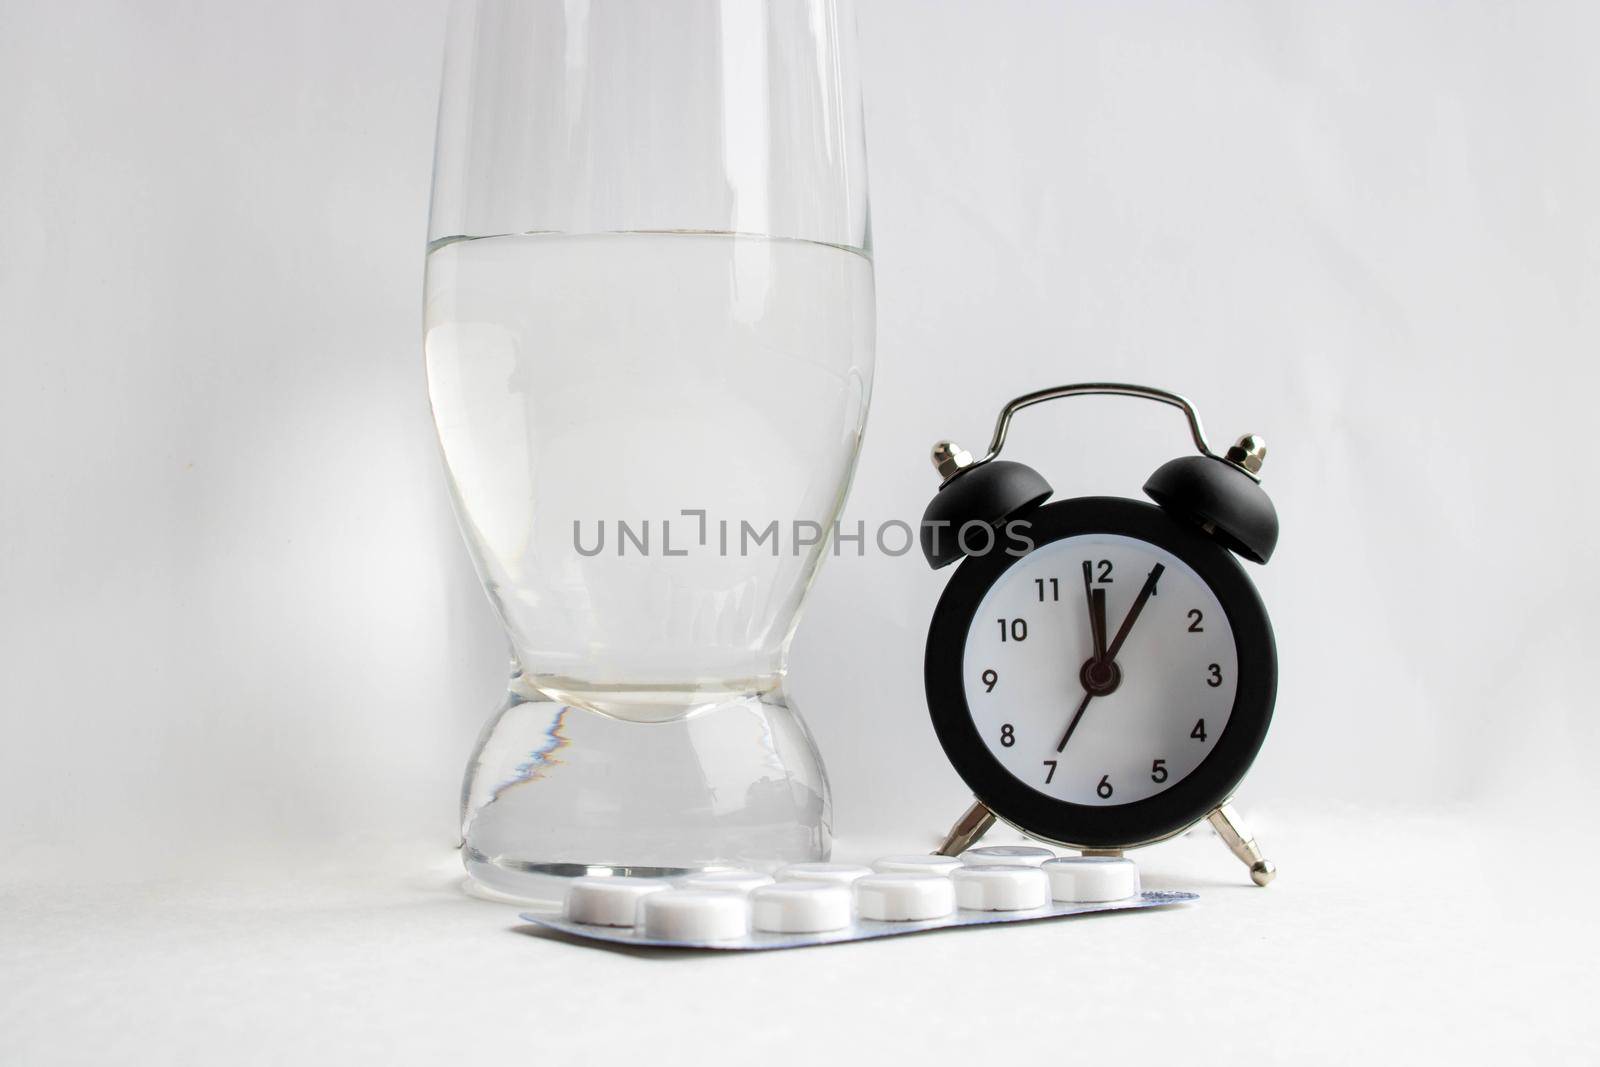 Medical tablets and a glass of water next to the clock on a white background.